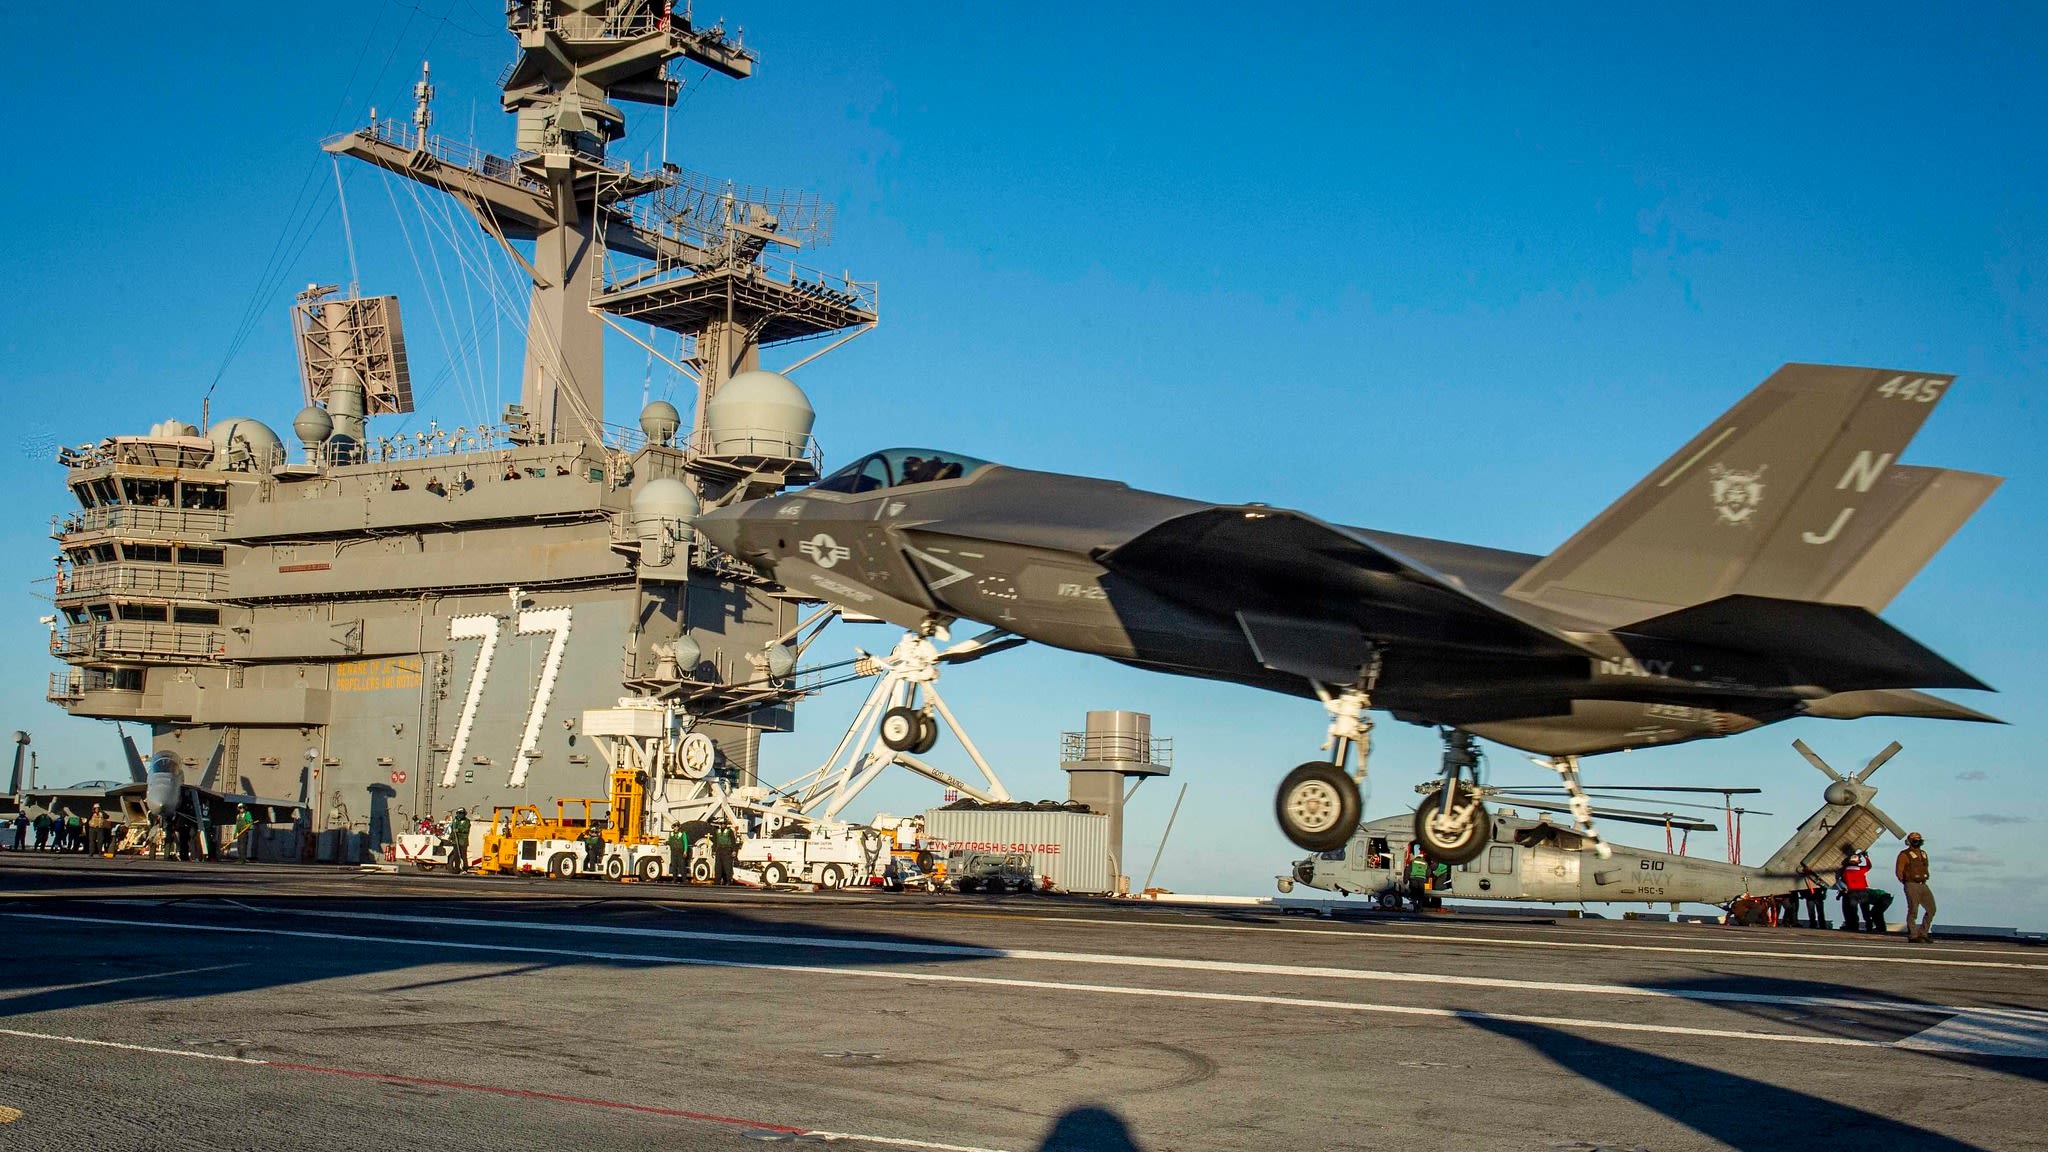 U.S. to deploy F-35 squadron to Japan for new carrier George Washington